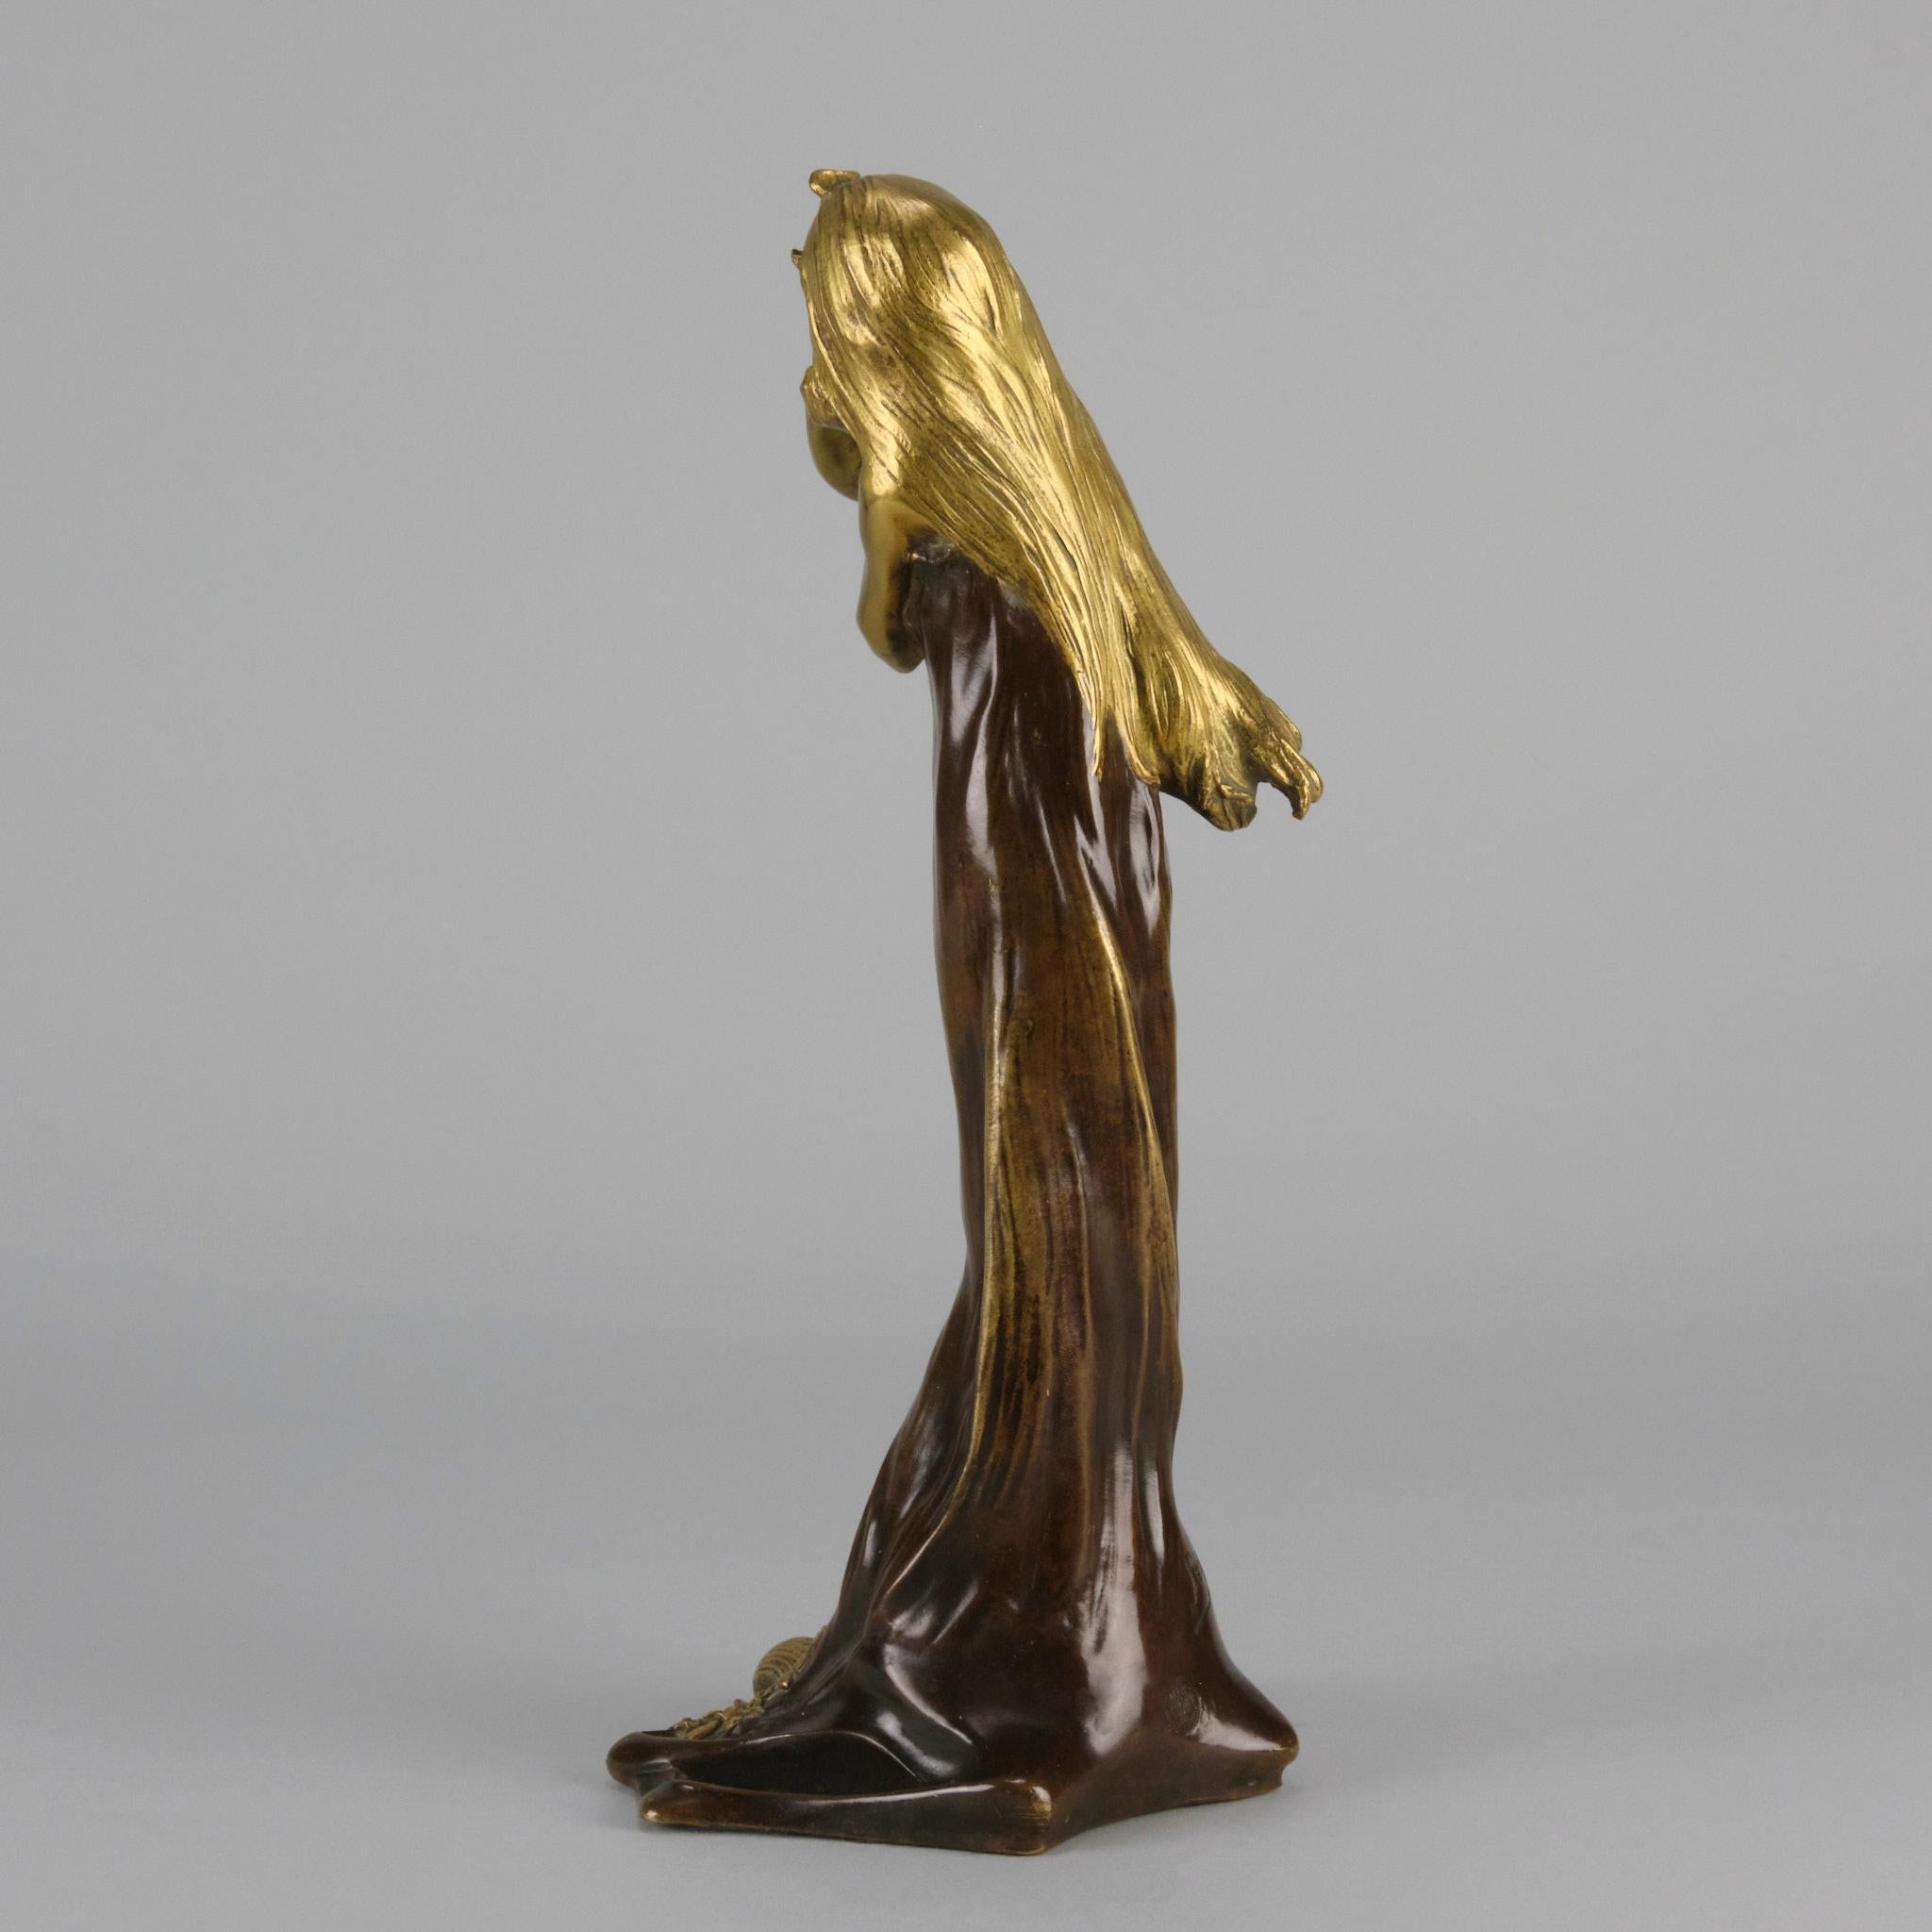 Gold Early 20th Century Bronze Entitled “Jeune Femme” by C Peyre